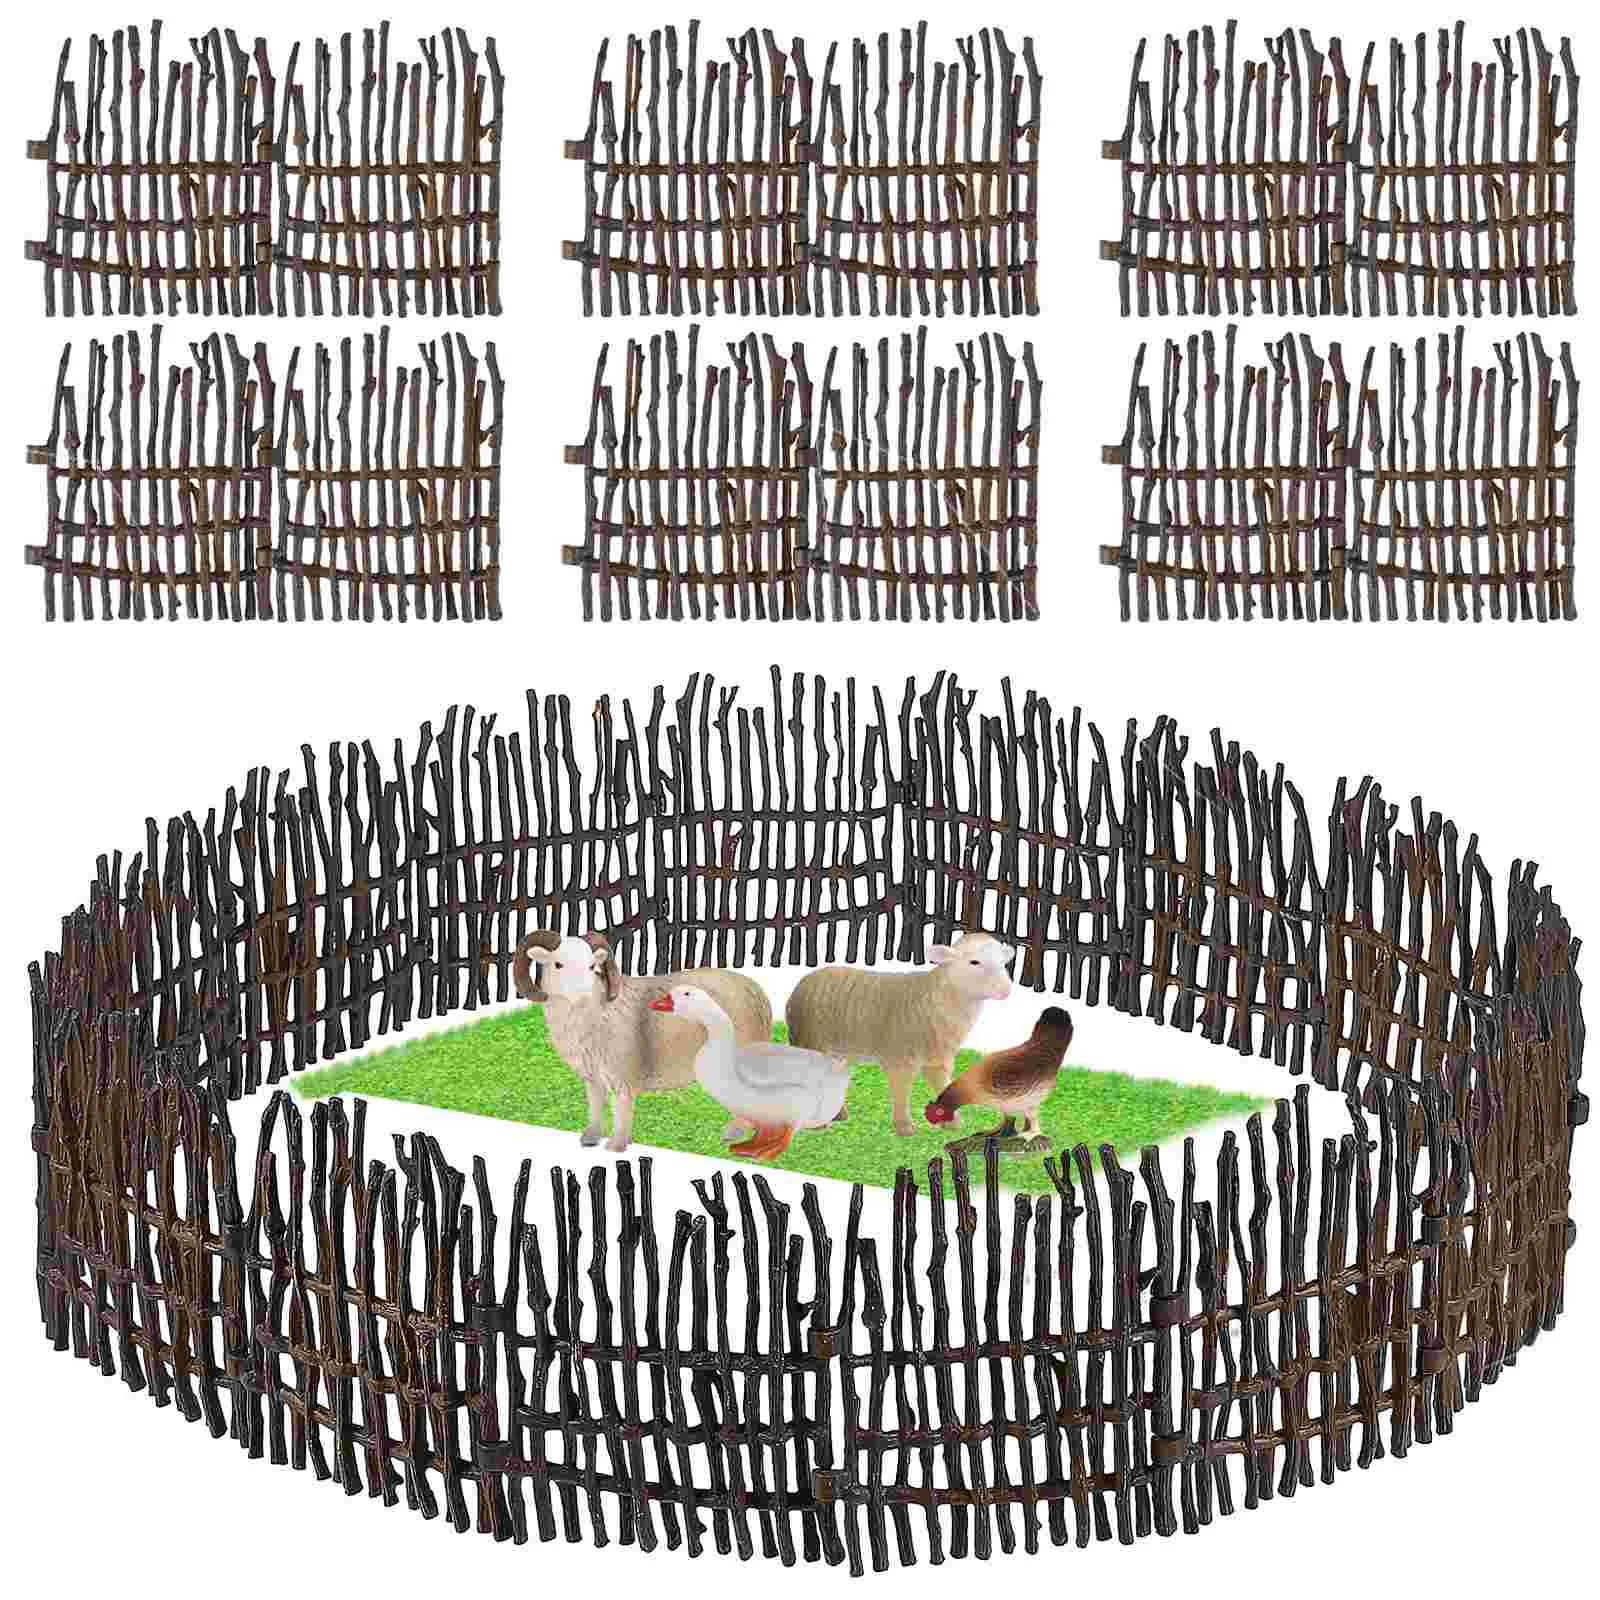 Fence Farm Corral Toys Horse Toy Barn Fencing Fences Accessories Paddock Garden Model Realistic Stable Playset Mini Tiny Ranch